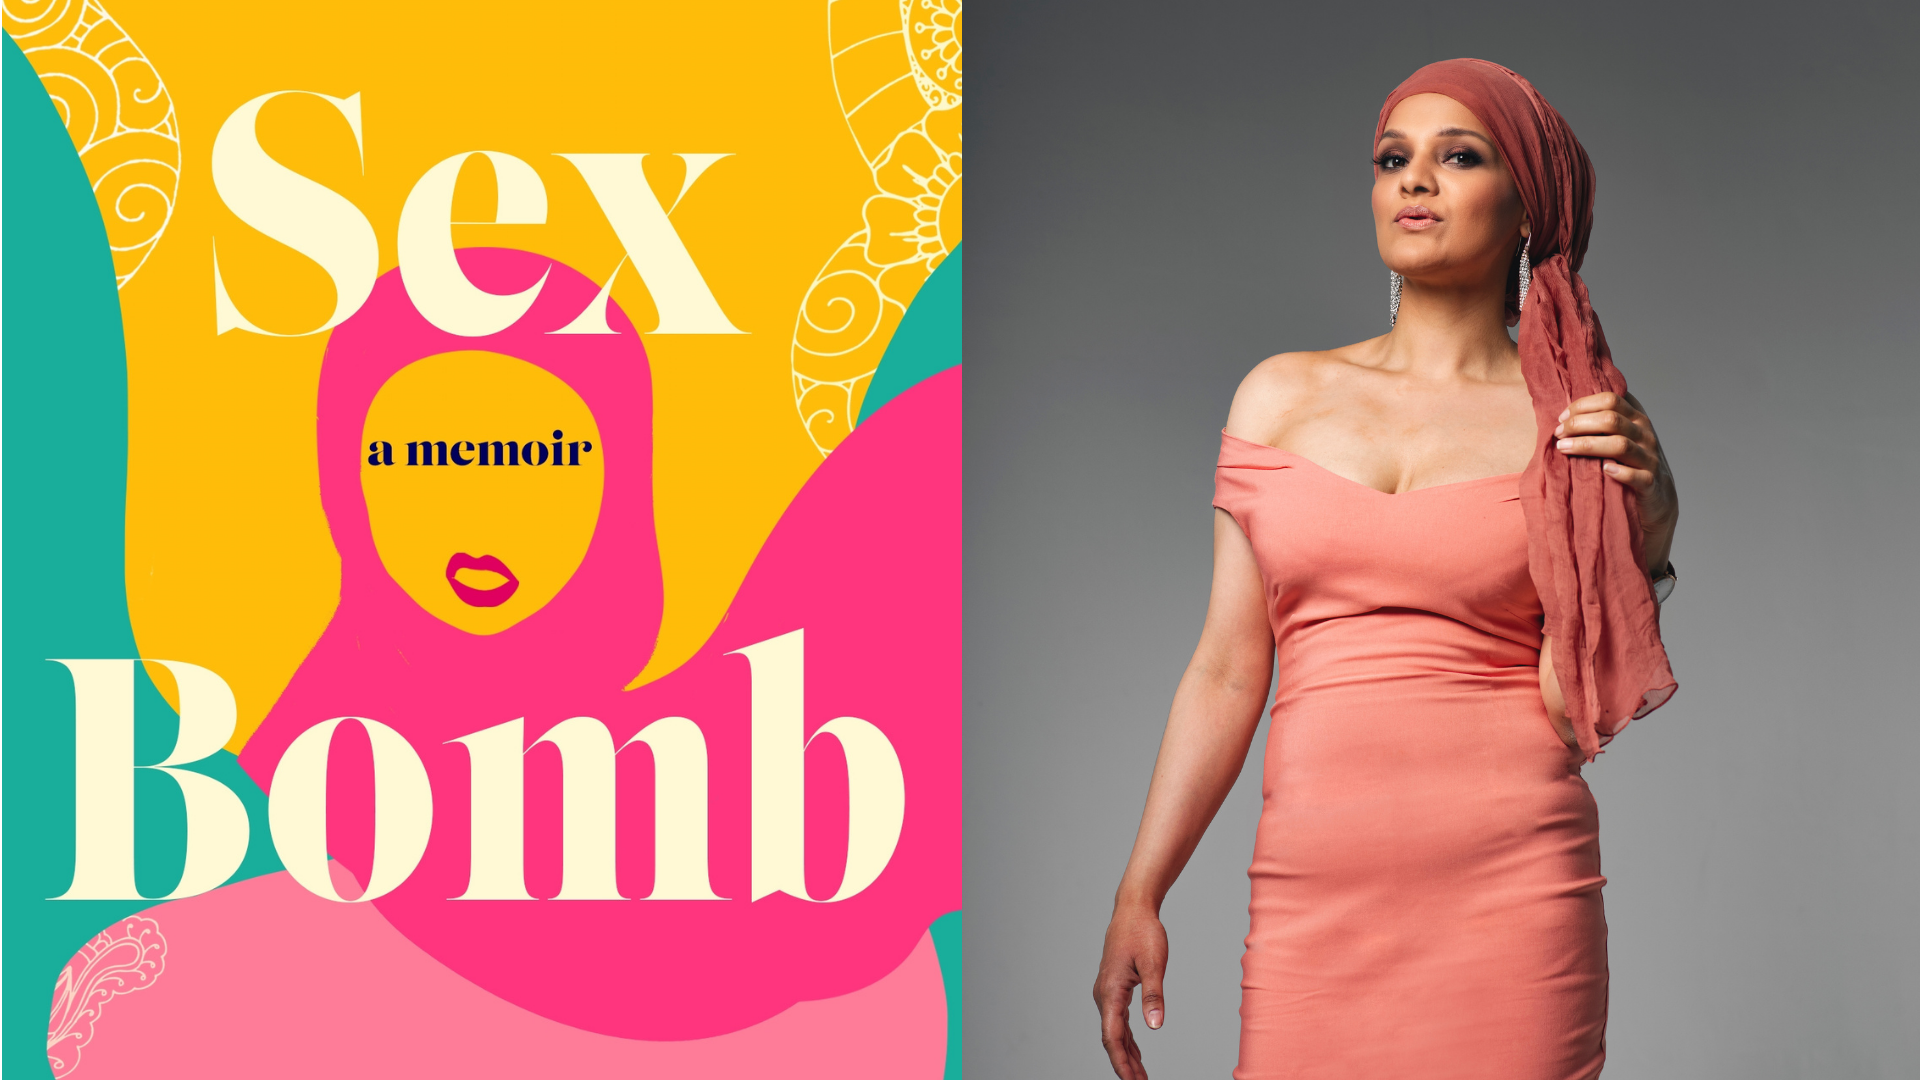 Composite of 'Sex Bomb' book cover and author headshot of Sadia Azmat 